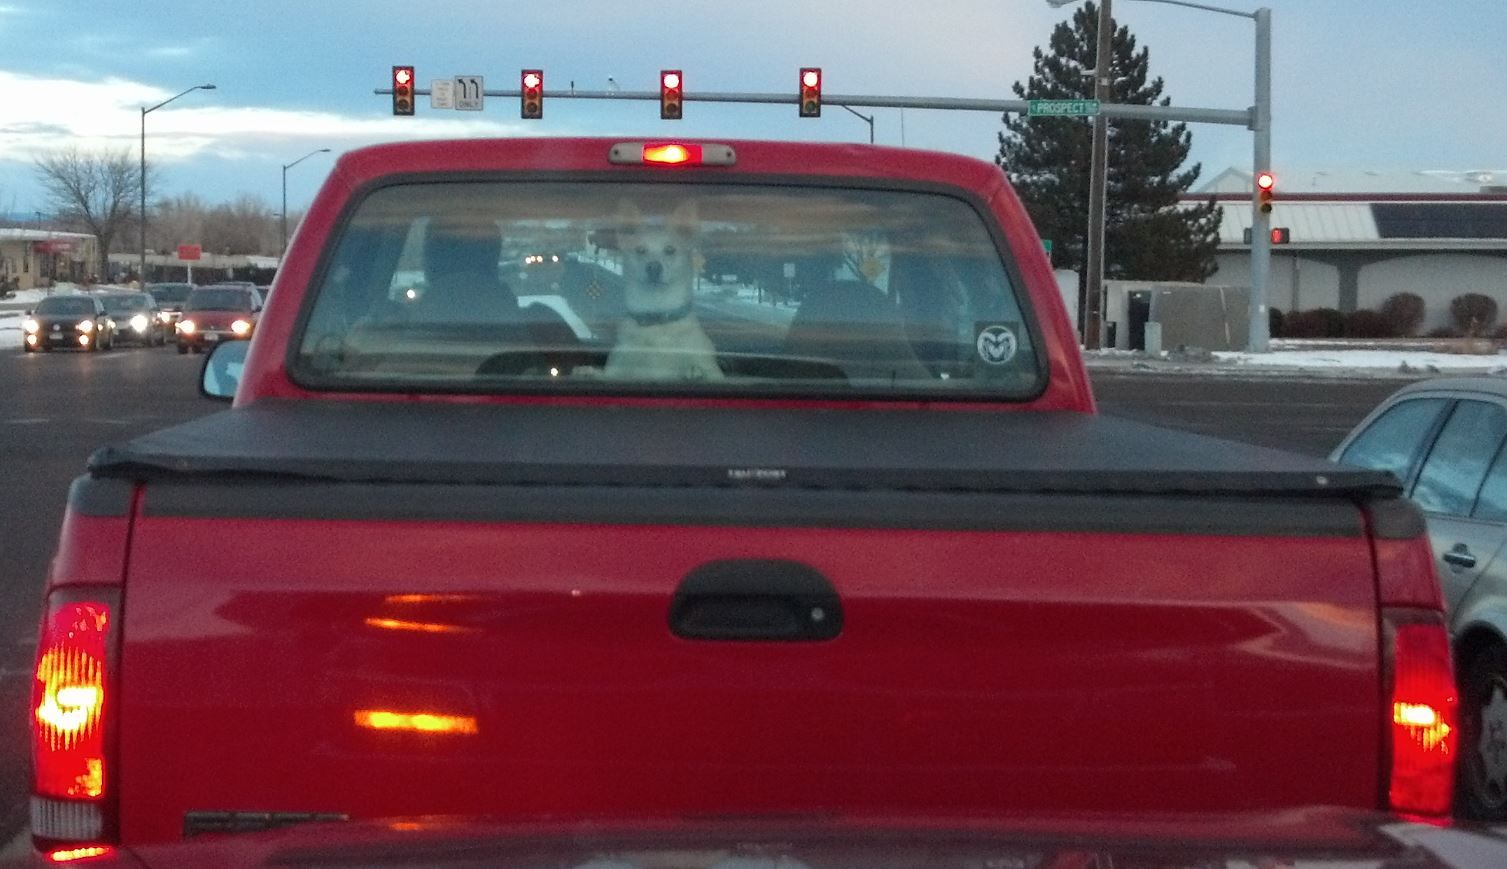 The moment my dog realized I was in the truck behind him...